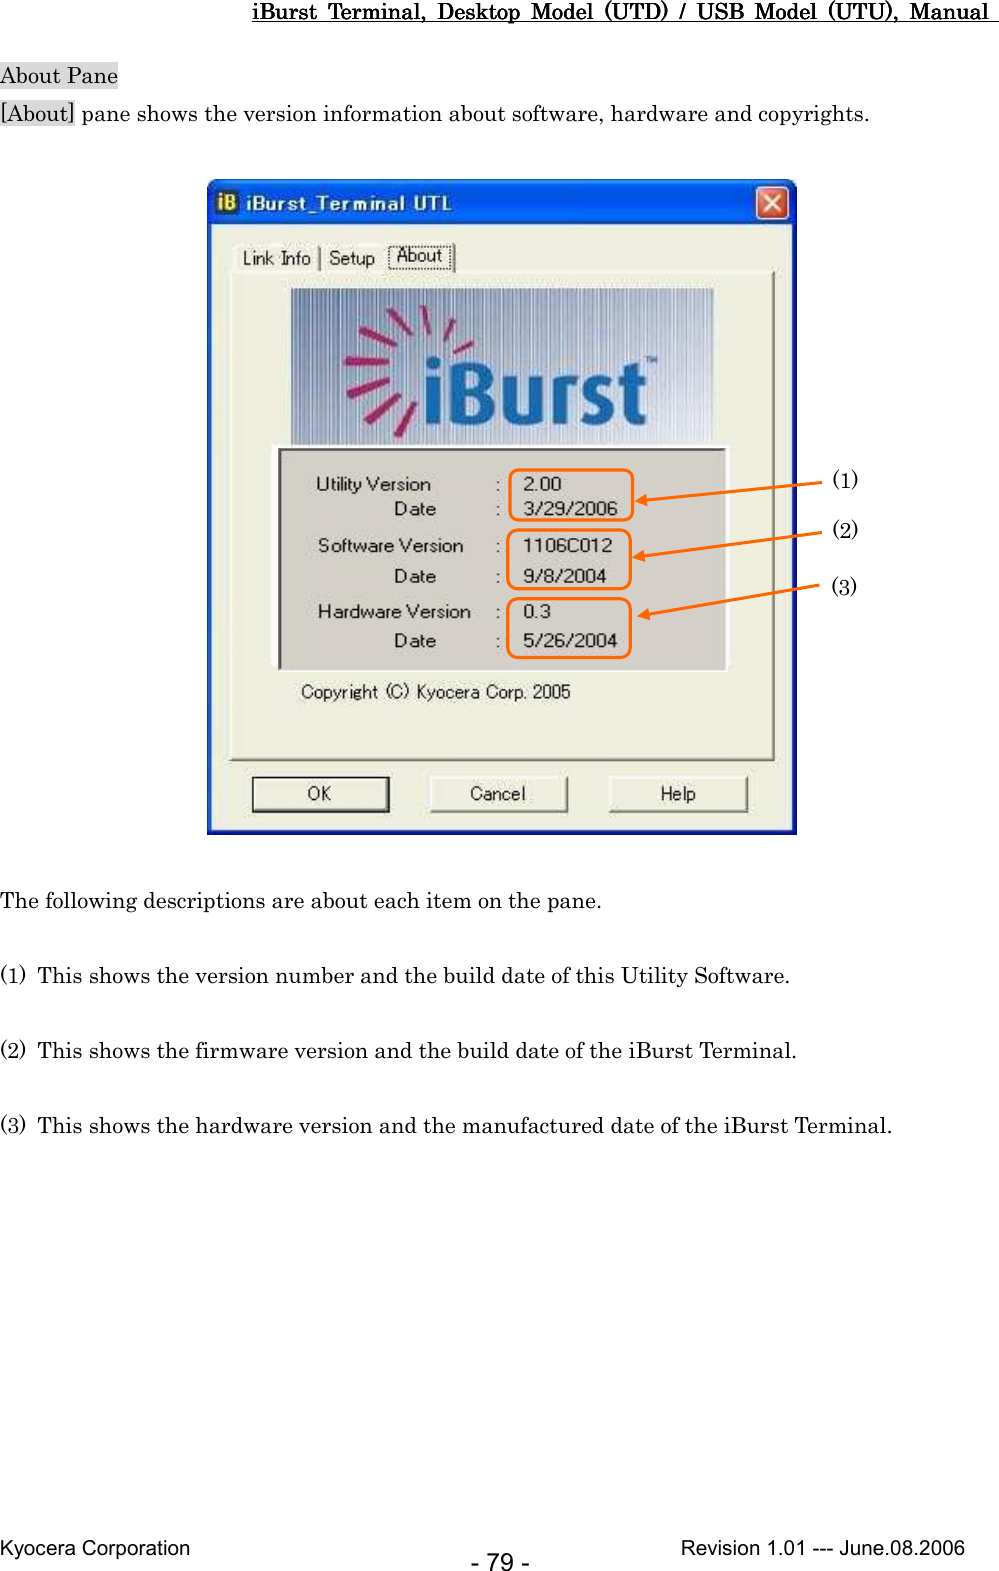 iBurst  Terminal,  Desktop  Model  (UTD)  /  USB  Model  (UTU),  Manual iBurst  Terminal,  Desktop  Model  (UTD)  /  USB  Model  (UTU),  Manual iBurst  Terminal,  Desktop  Model  (UTD)  /  USB  Model  (UTU),  Manual iBurst  Terminal,  Desktop  Model  (UTD)  /  USB  Model  (UTU),  Manual       Kyocera Corporation                                                                                              Revision 1.01 --- June.08.2006 - 79 - About Pane [About] pane shows the version information about software, hardware and copyrights.    The following descriptions are about each item on the pane.  (1) This shows the version number and the build date of this Utility Software.  (2) This shows the firmware version and the build date of the iBurst Terminal.  (3) This shows the hardware version and the manufactured date of the iBurst Terminal.  (1) (2) (3) 